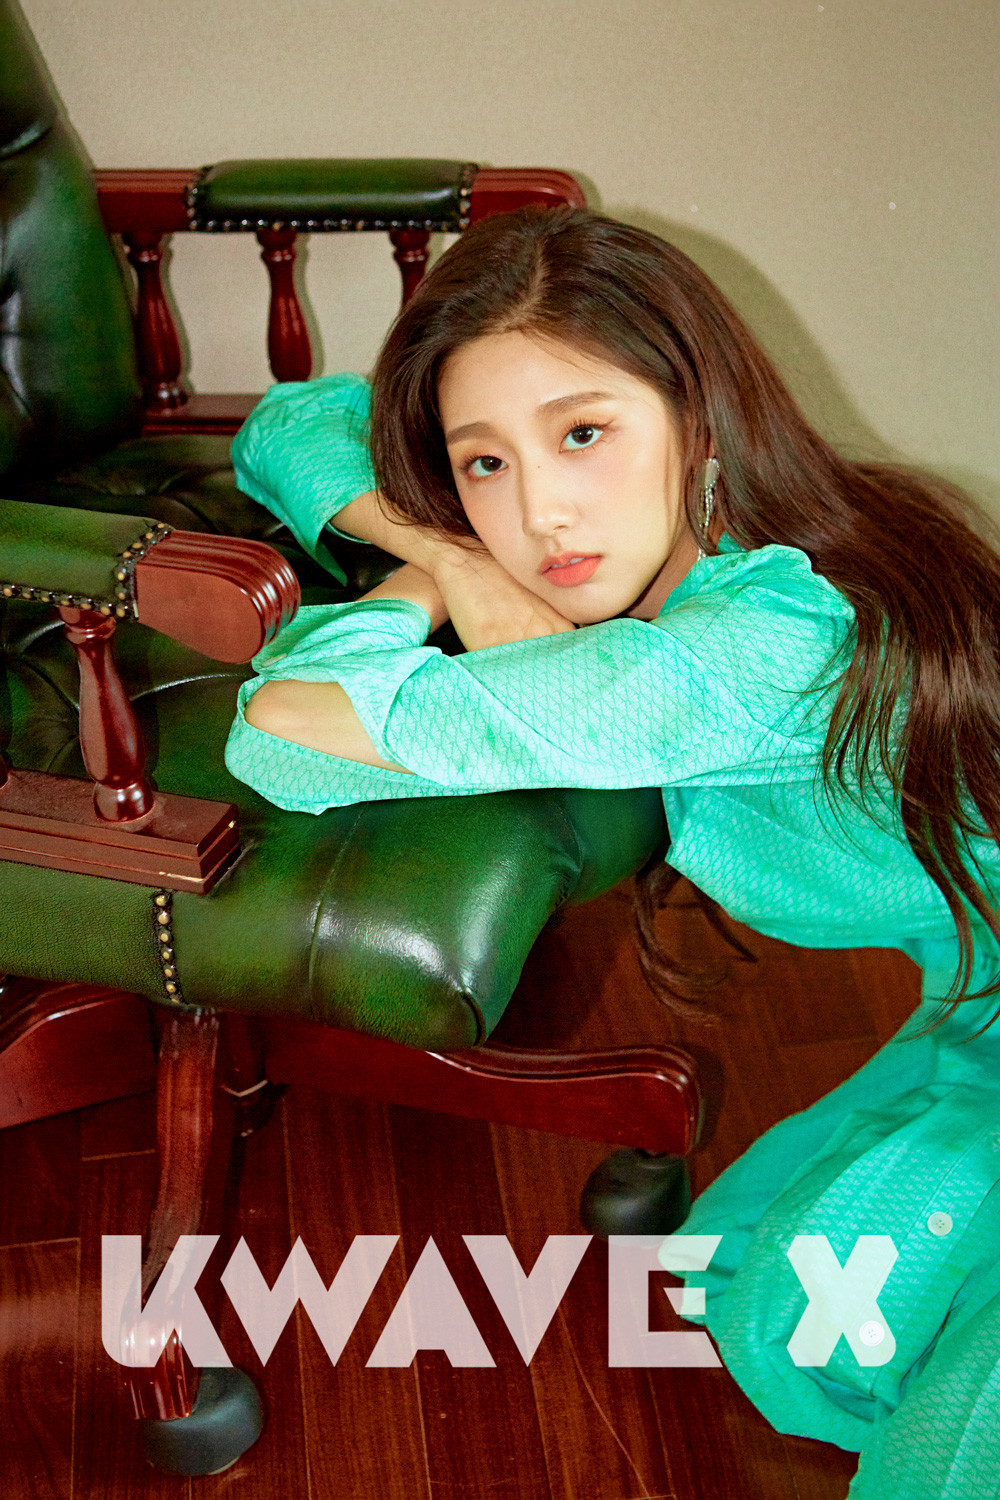 lovelyz-ryu-soo-jung-jeong-ye-in-stay-home-in-pictorial-with-kwave-x-3